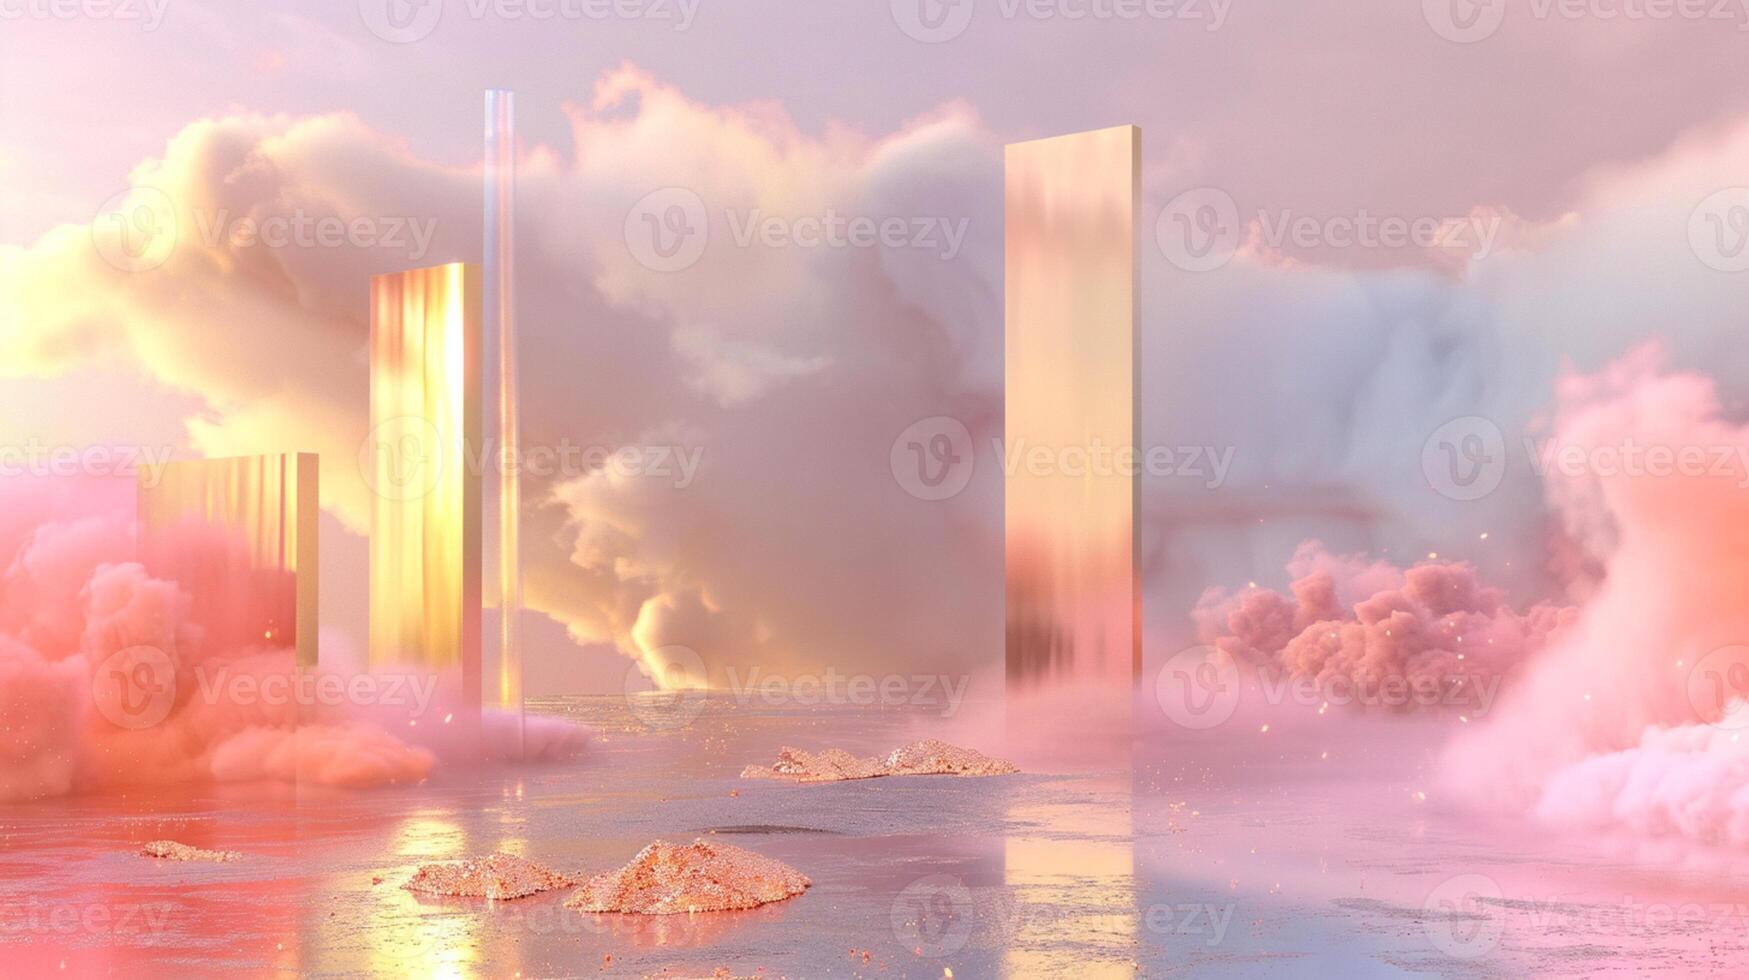 A dreamy pink and gold background with eucalyptus leaves, creating an atmosphere of luxury for product display in the style of surreal fantasy landscapes. photo